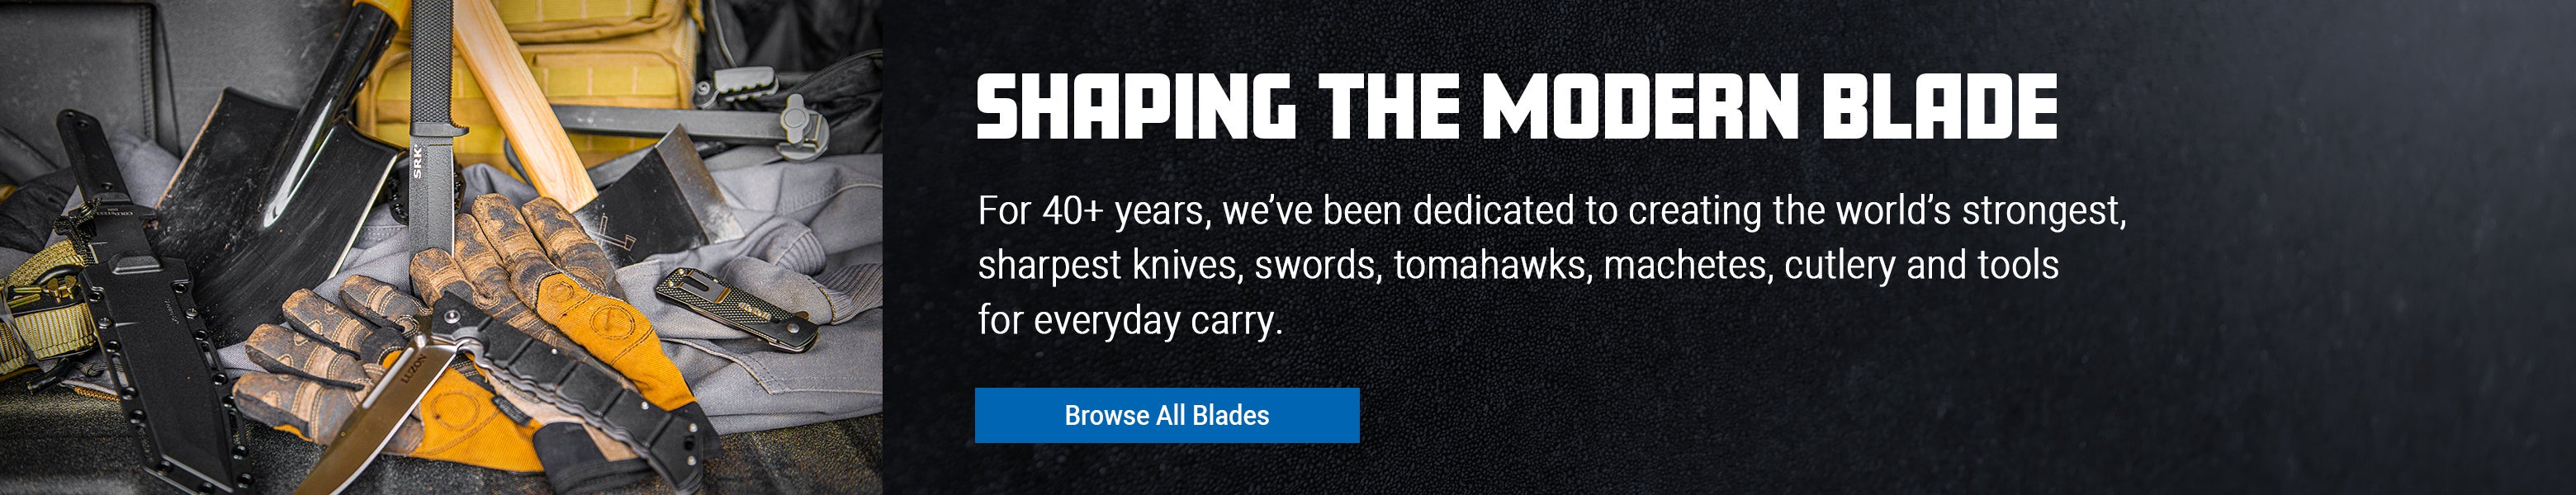 Browse All Blades